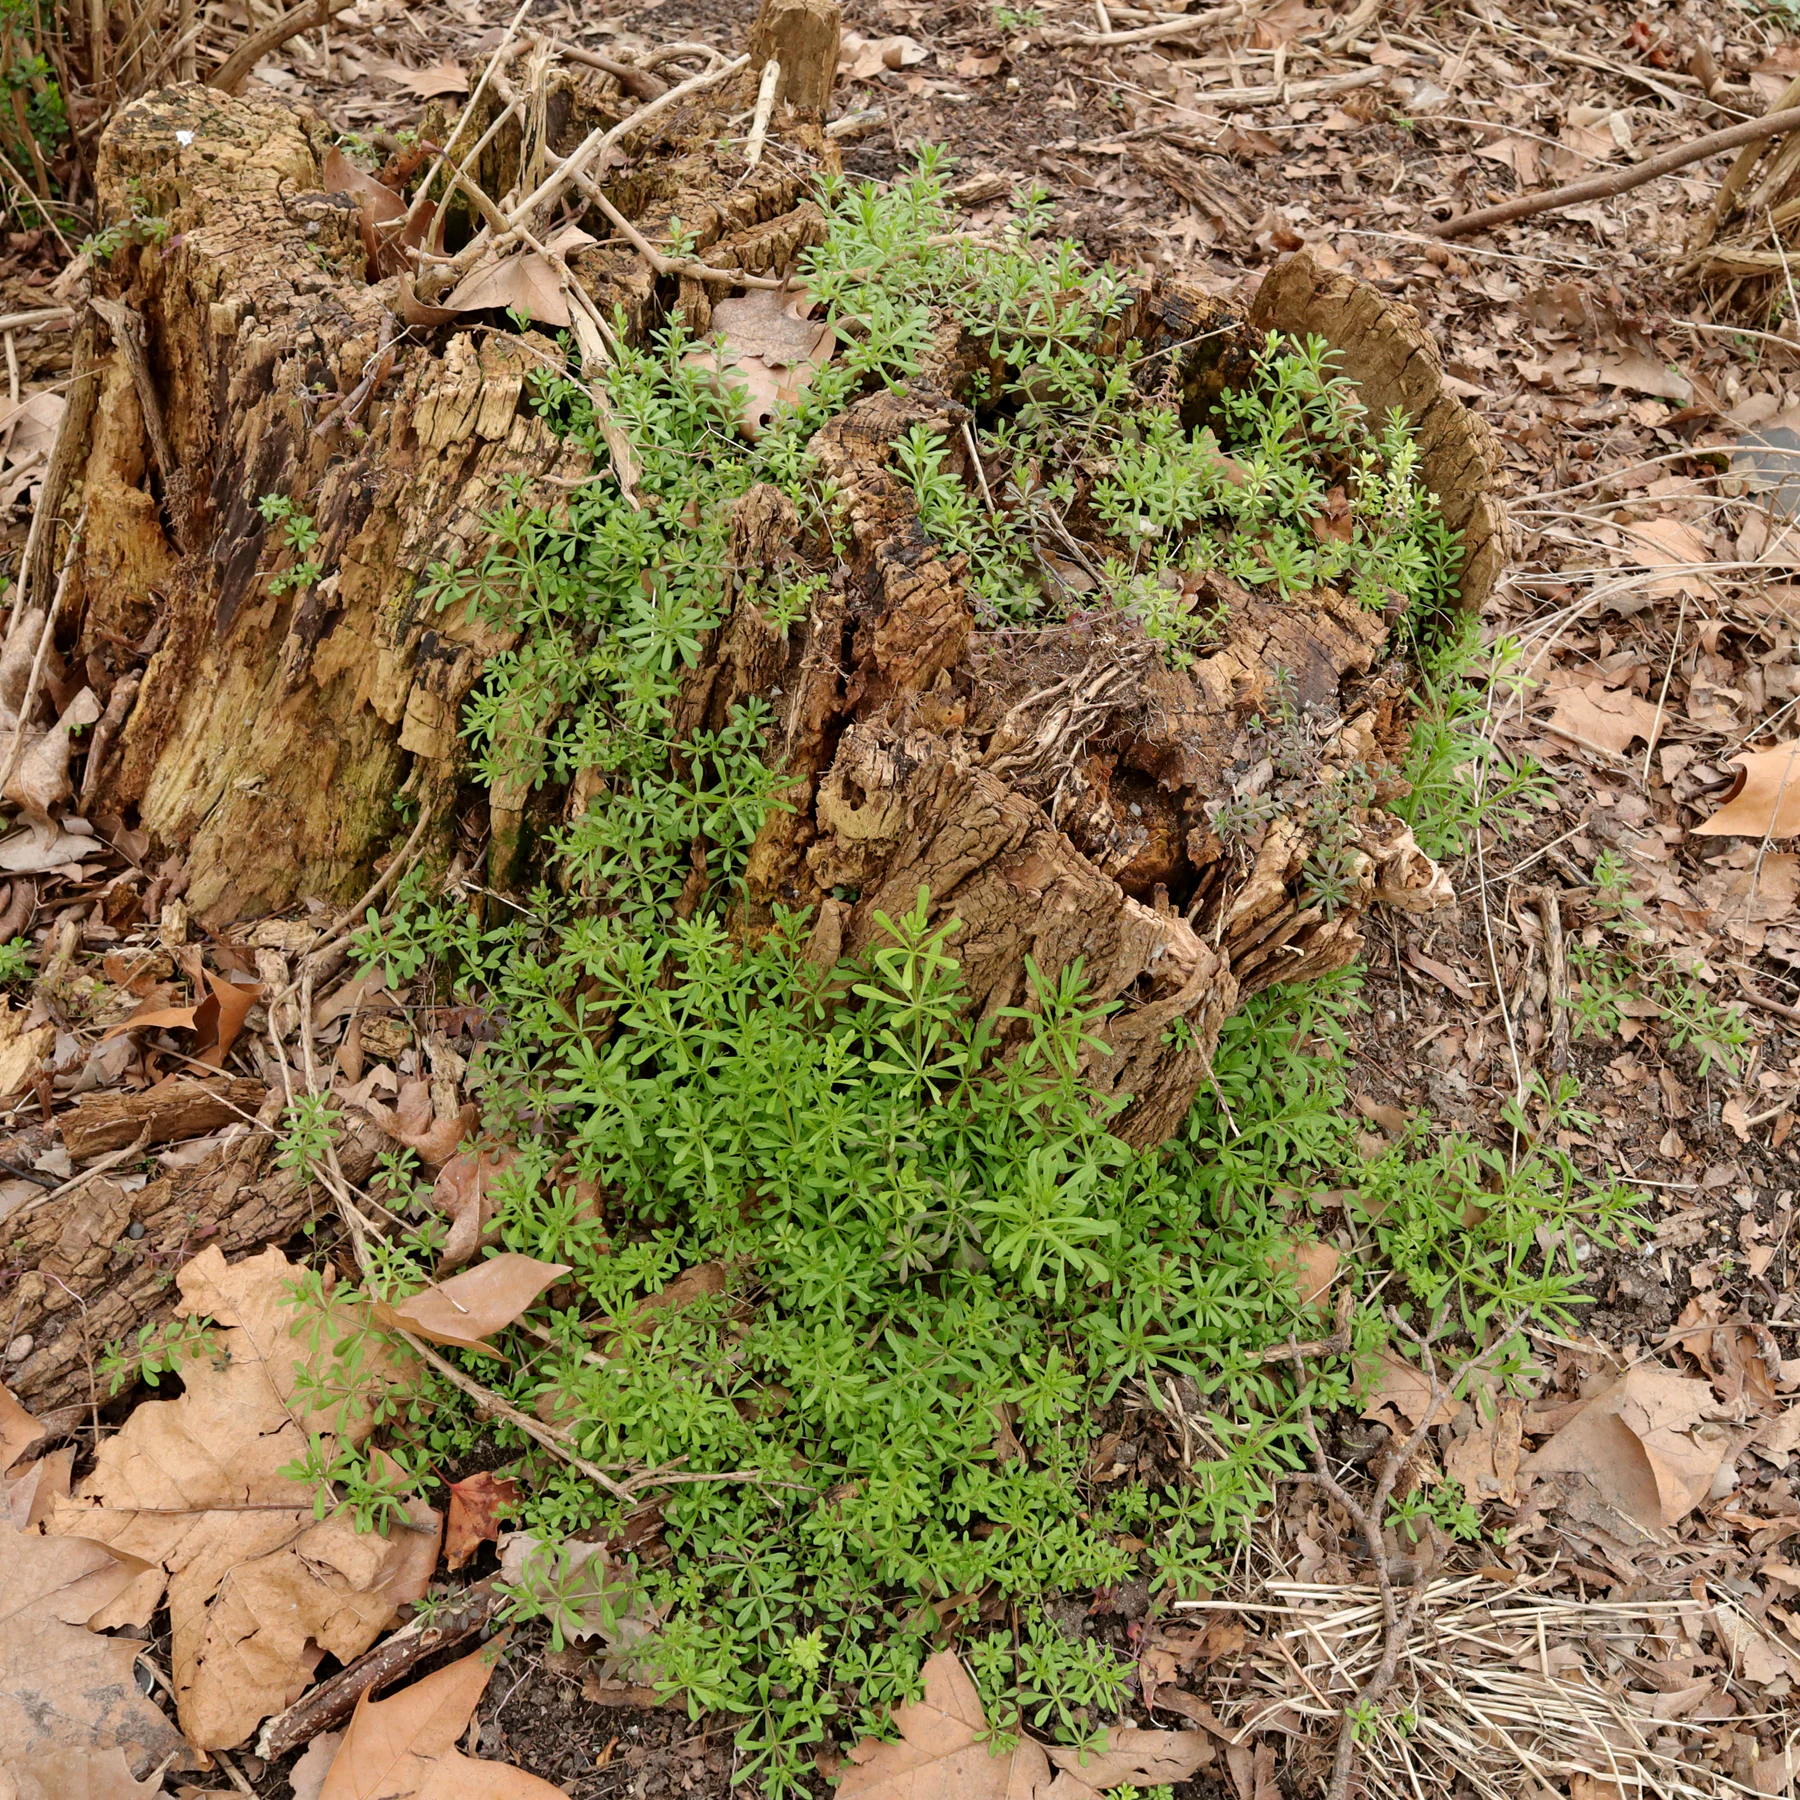 Cleavers growing on or from a tree stump